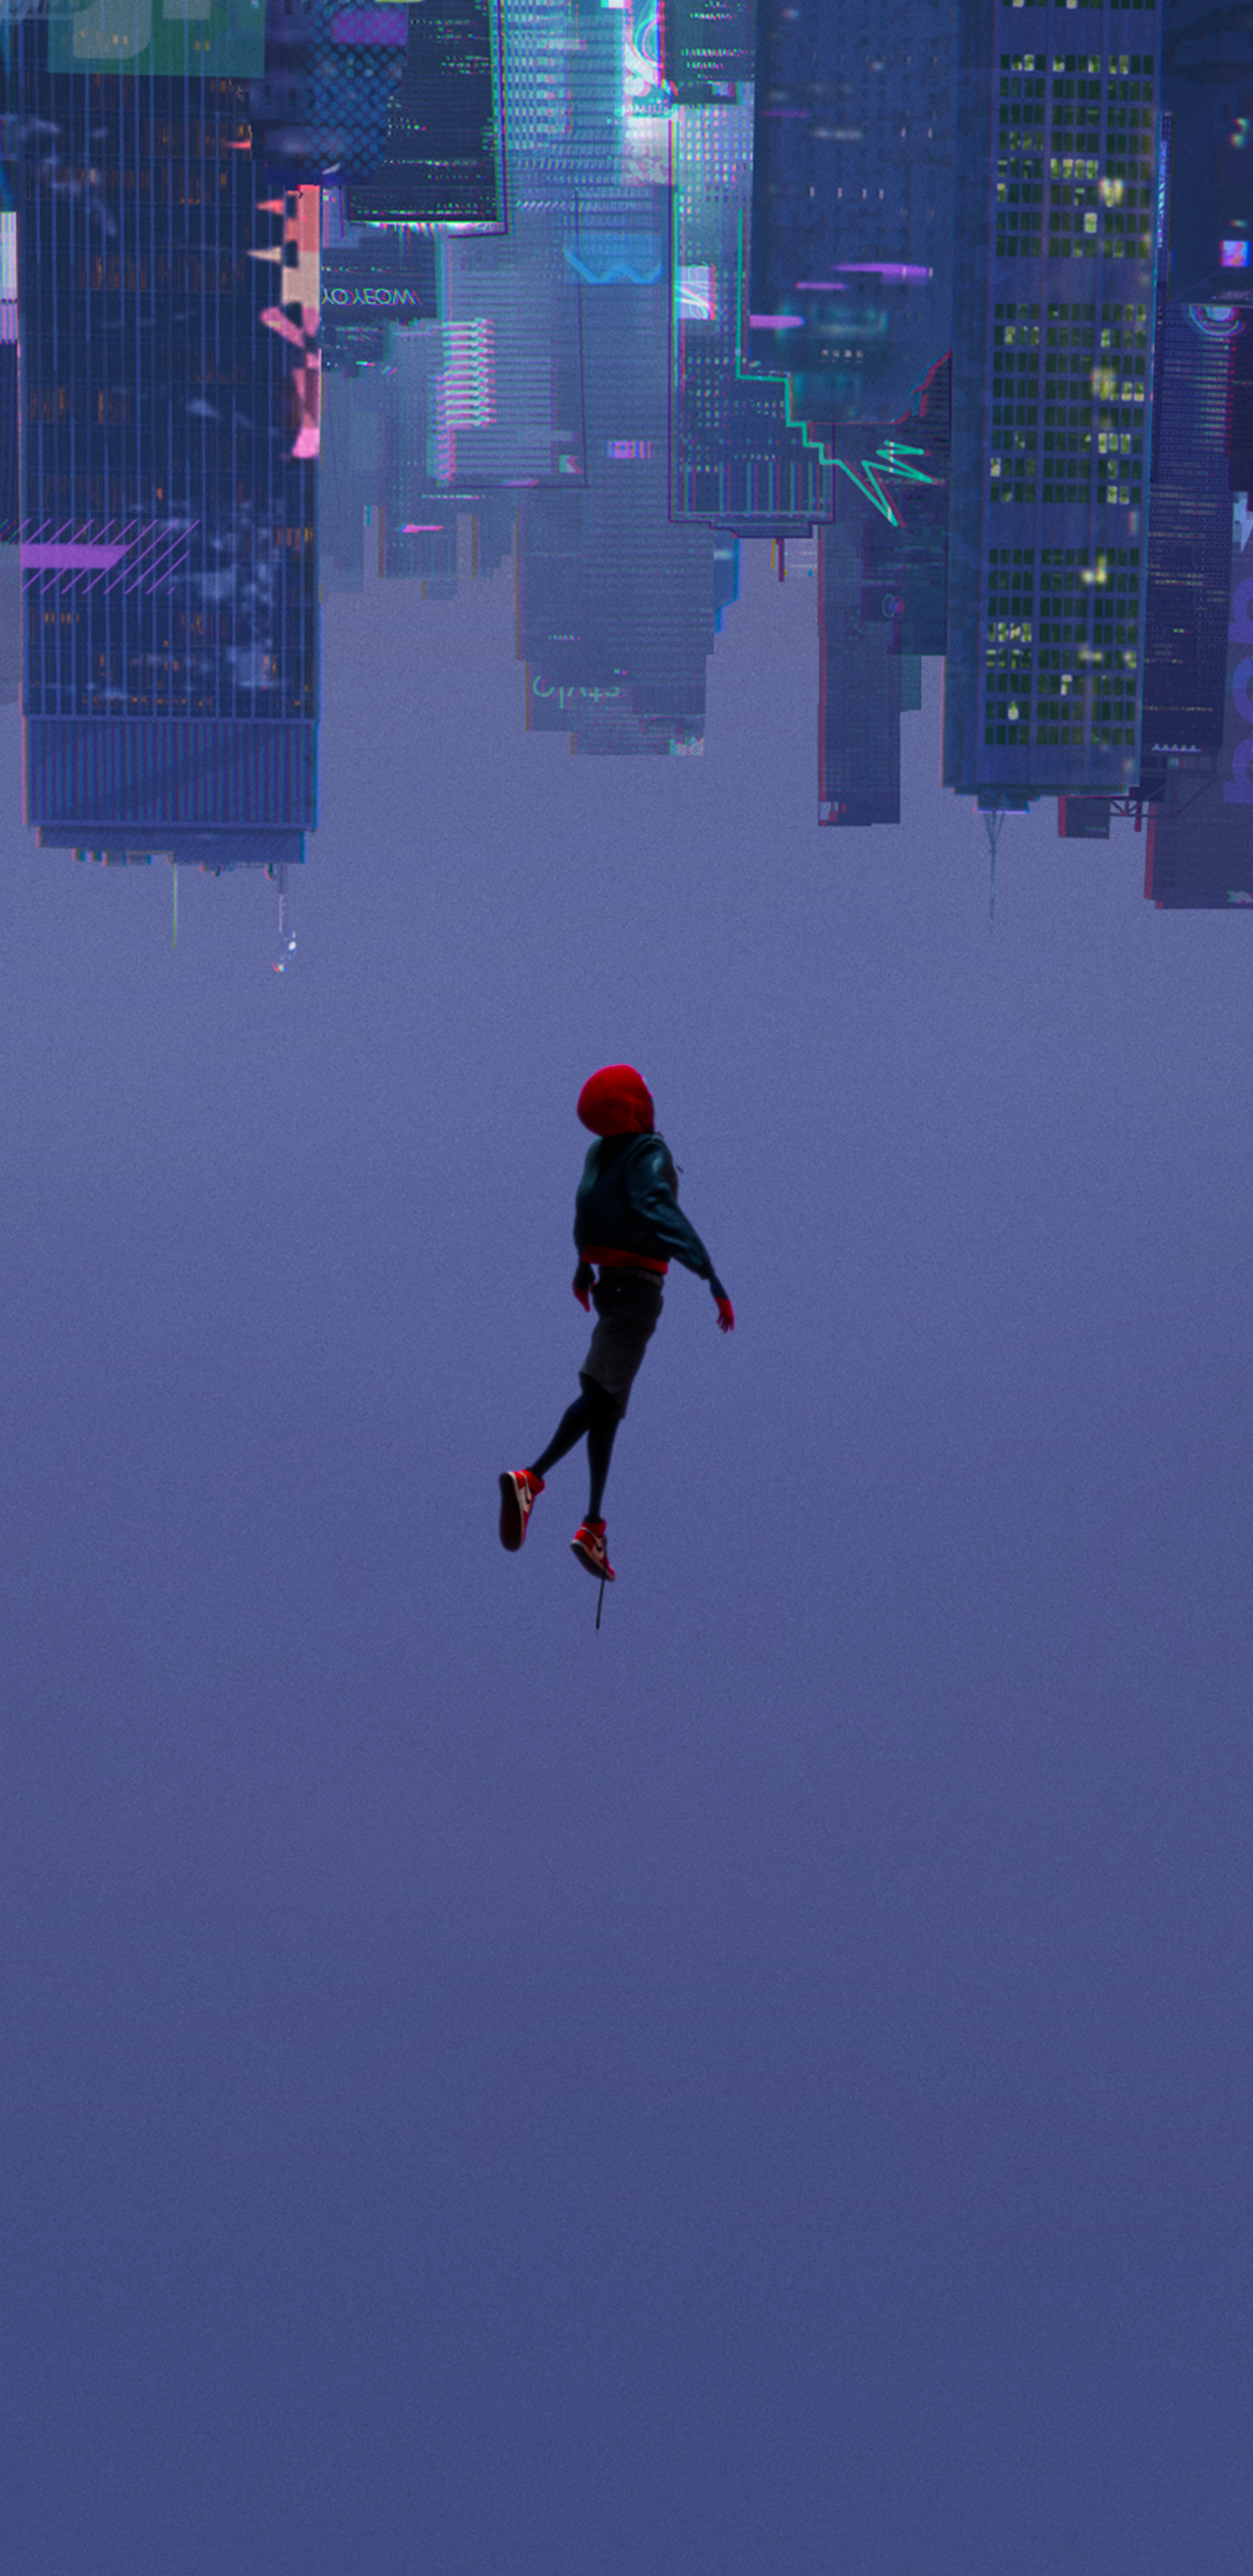 24+] Spider Man Into The Spider Verse Wallpapers - WallpaperSafari